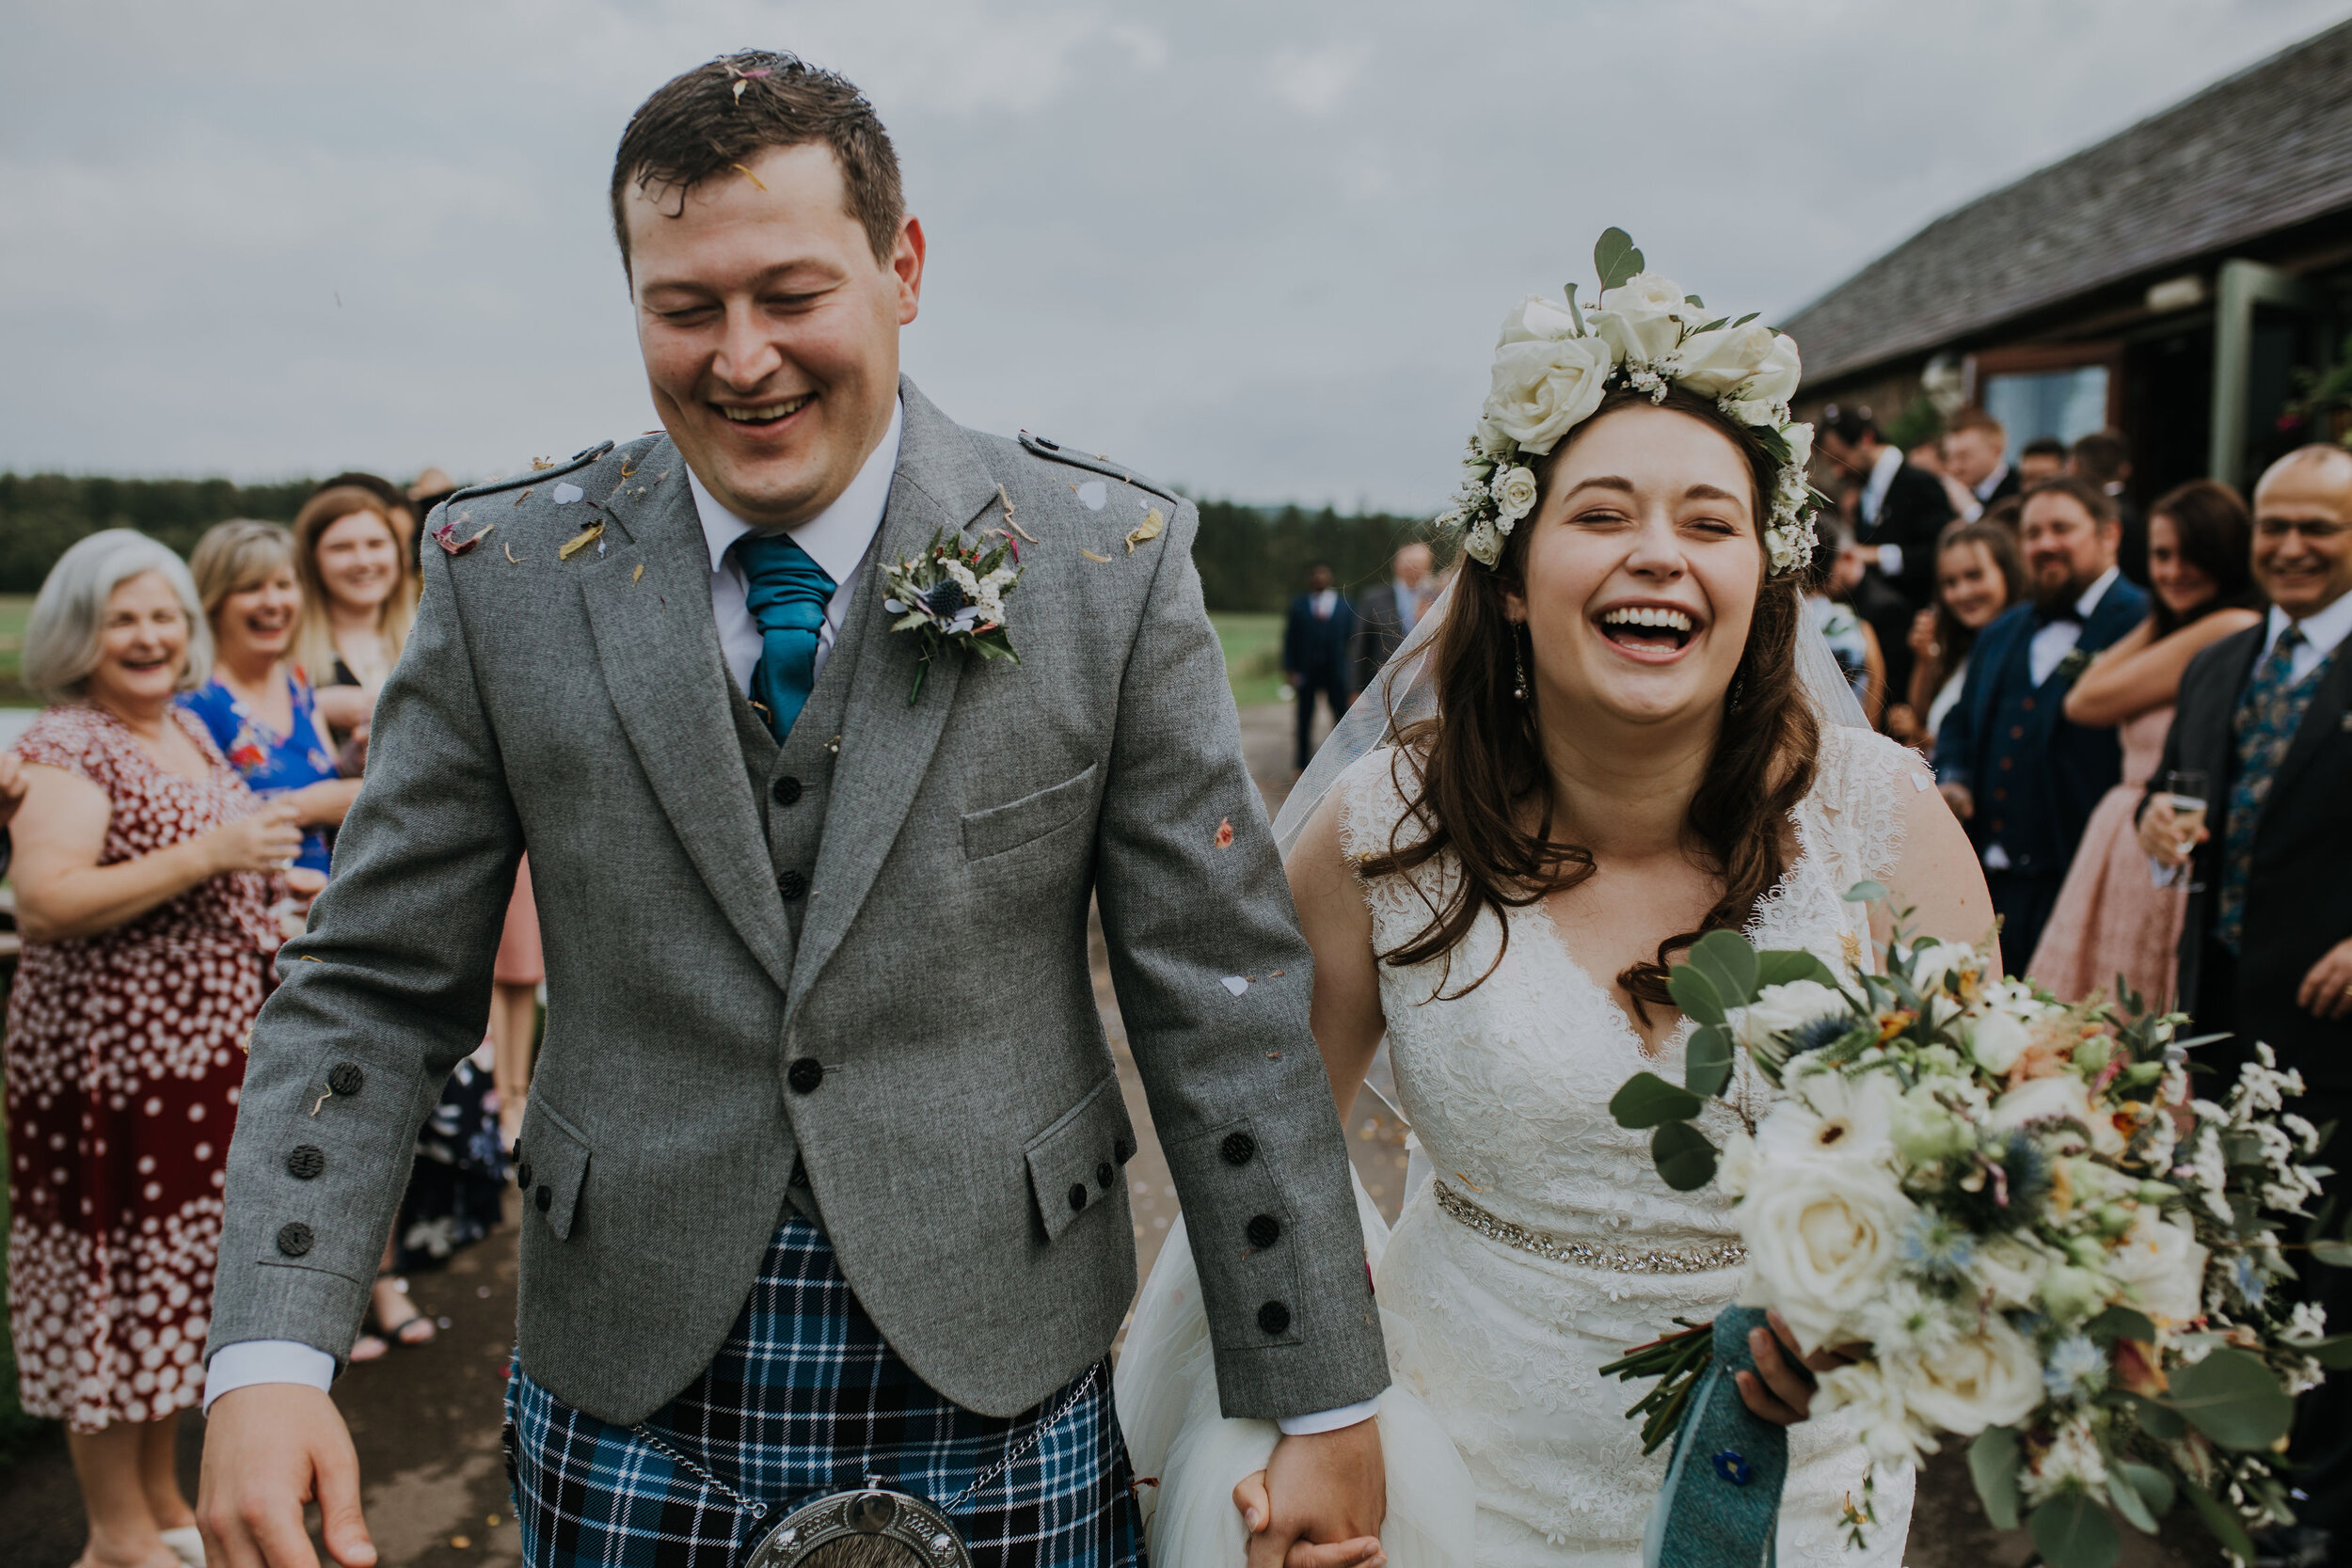 Scottish Bride wearing white floral crown alongside her groom at Bachilton Barn, Perthshire